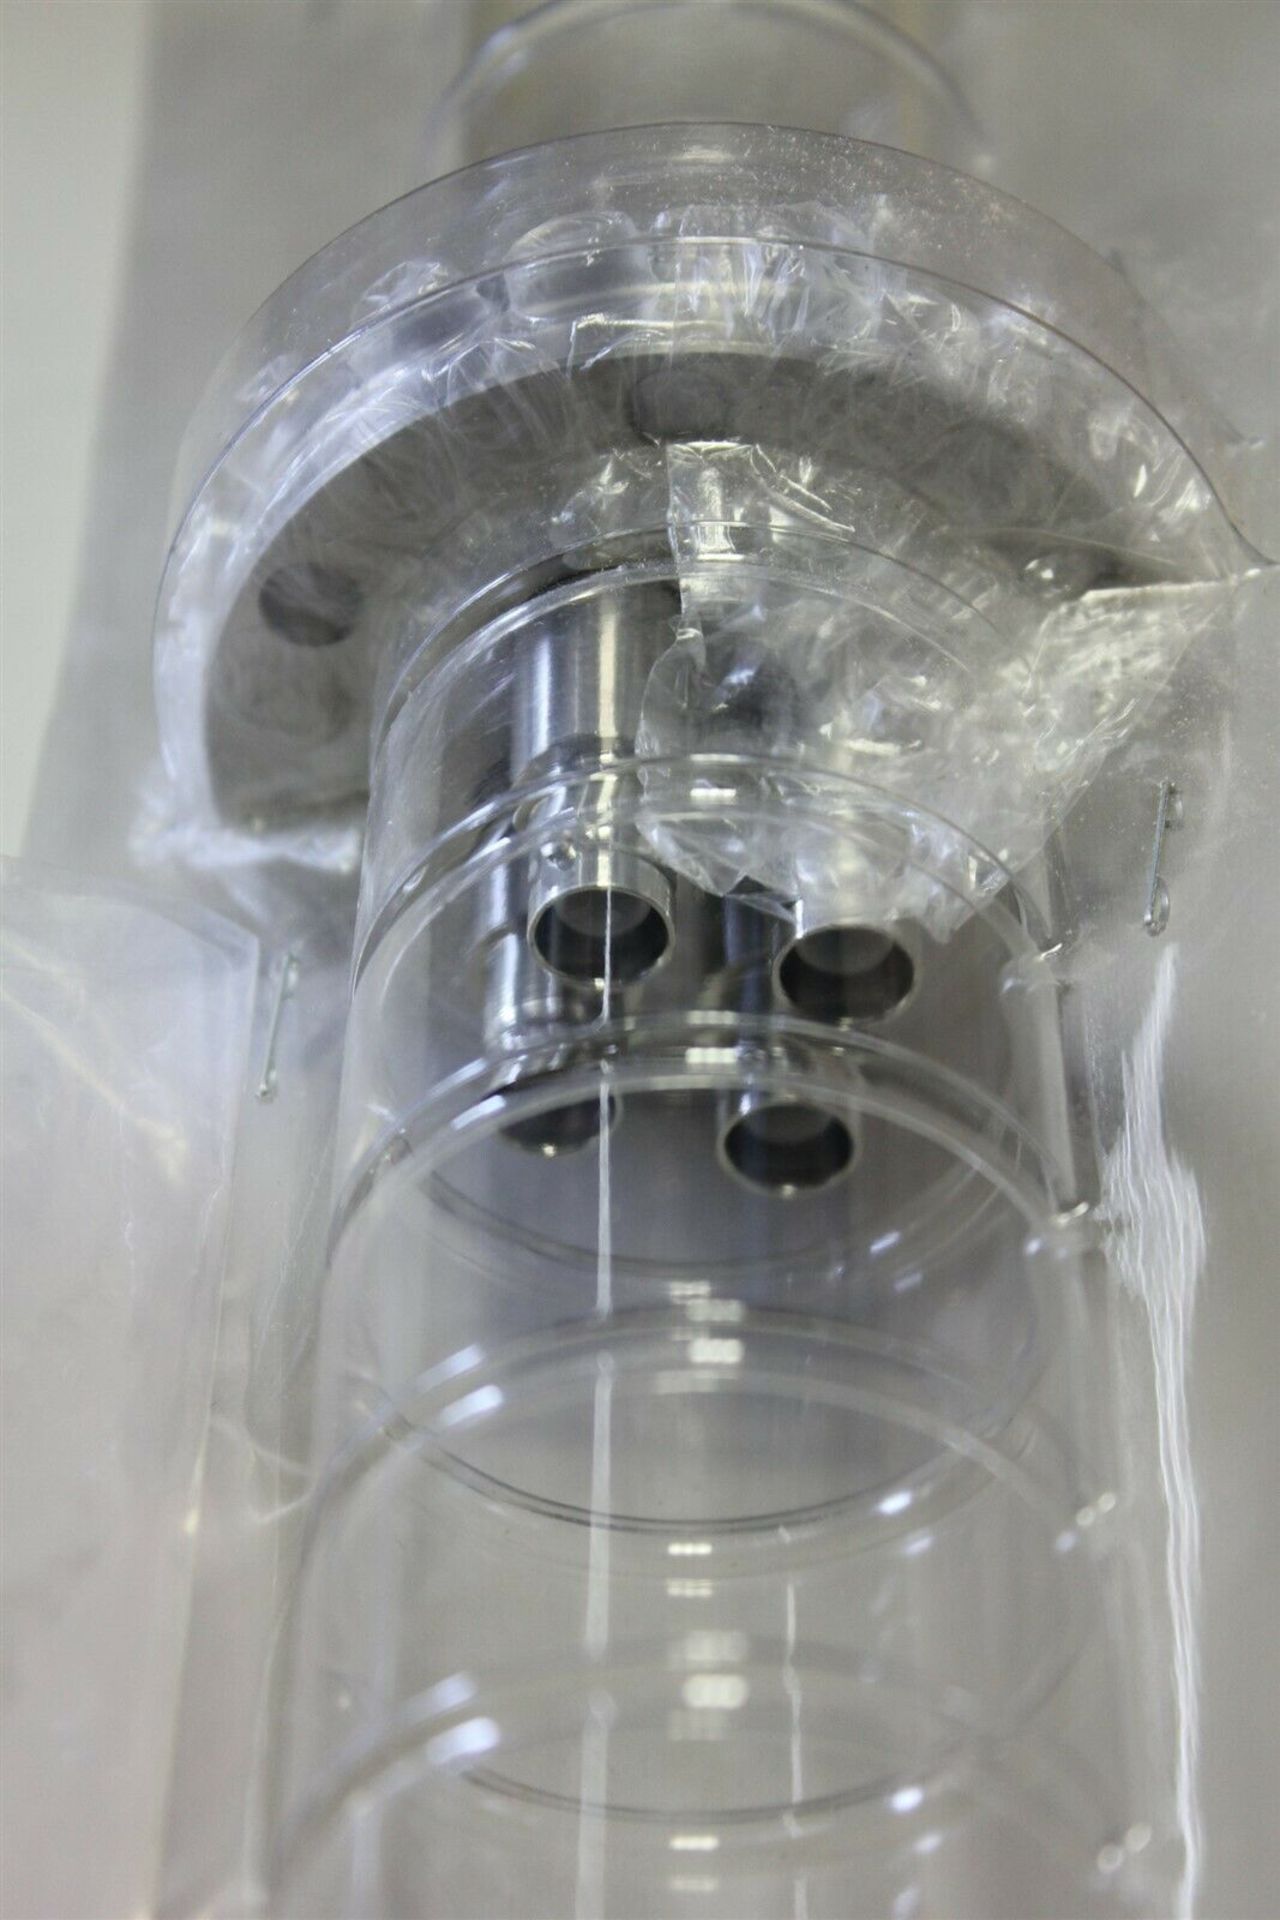 NEW SST SHV 4 PIN COAXIAL ELECTRICAL VACUUM FEEDTHROUGH - Image 4 of 7